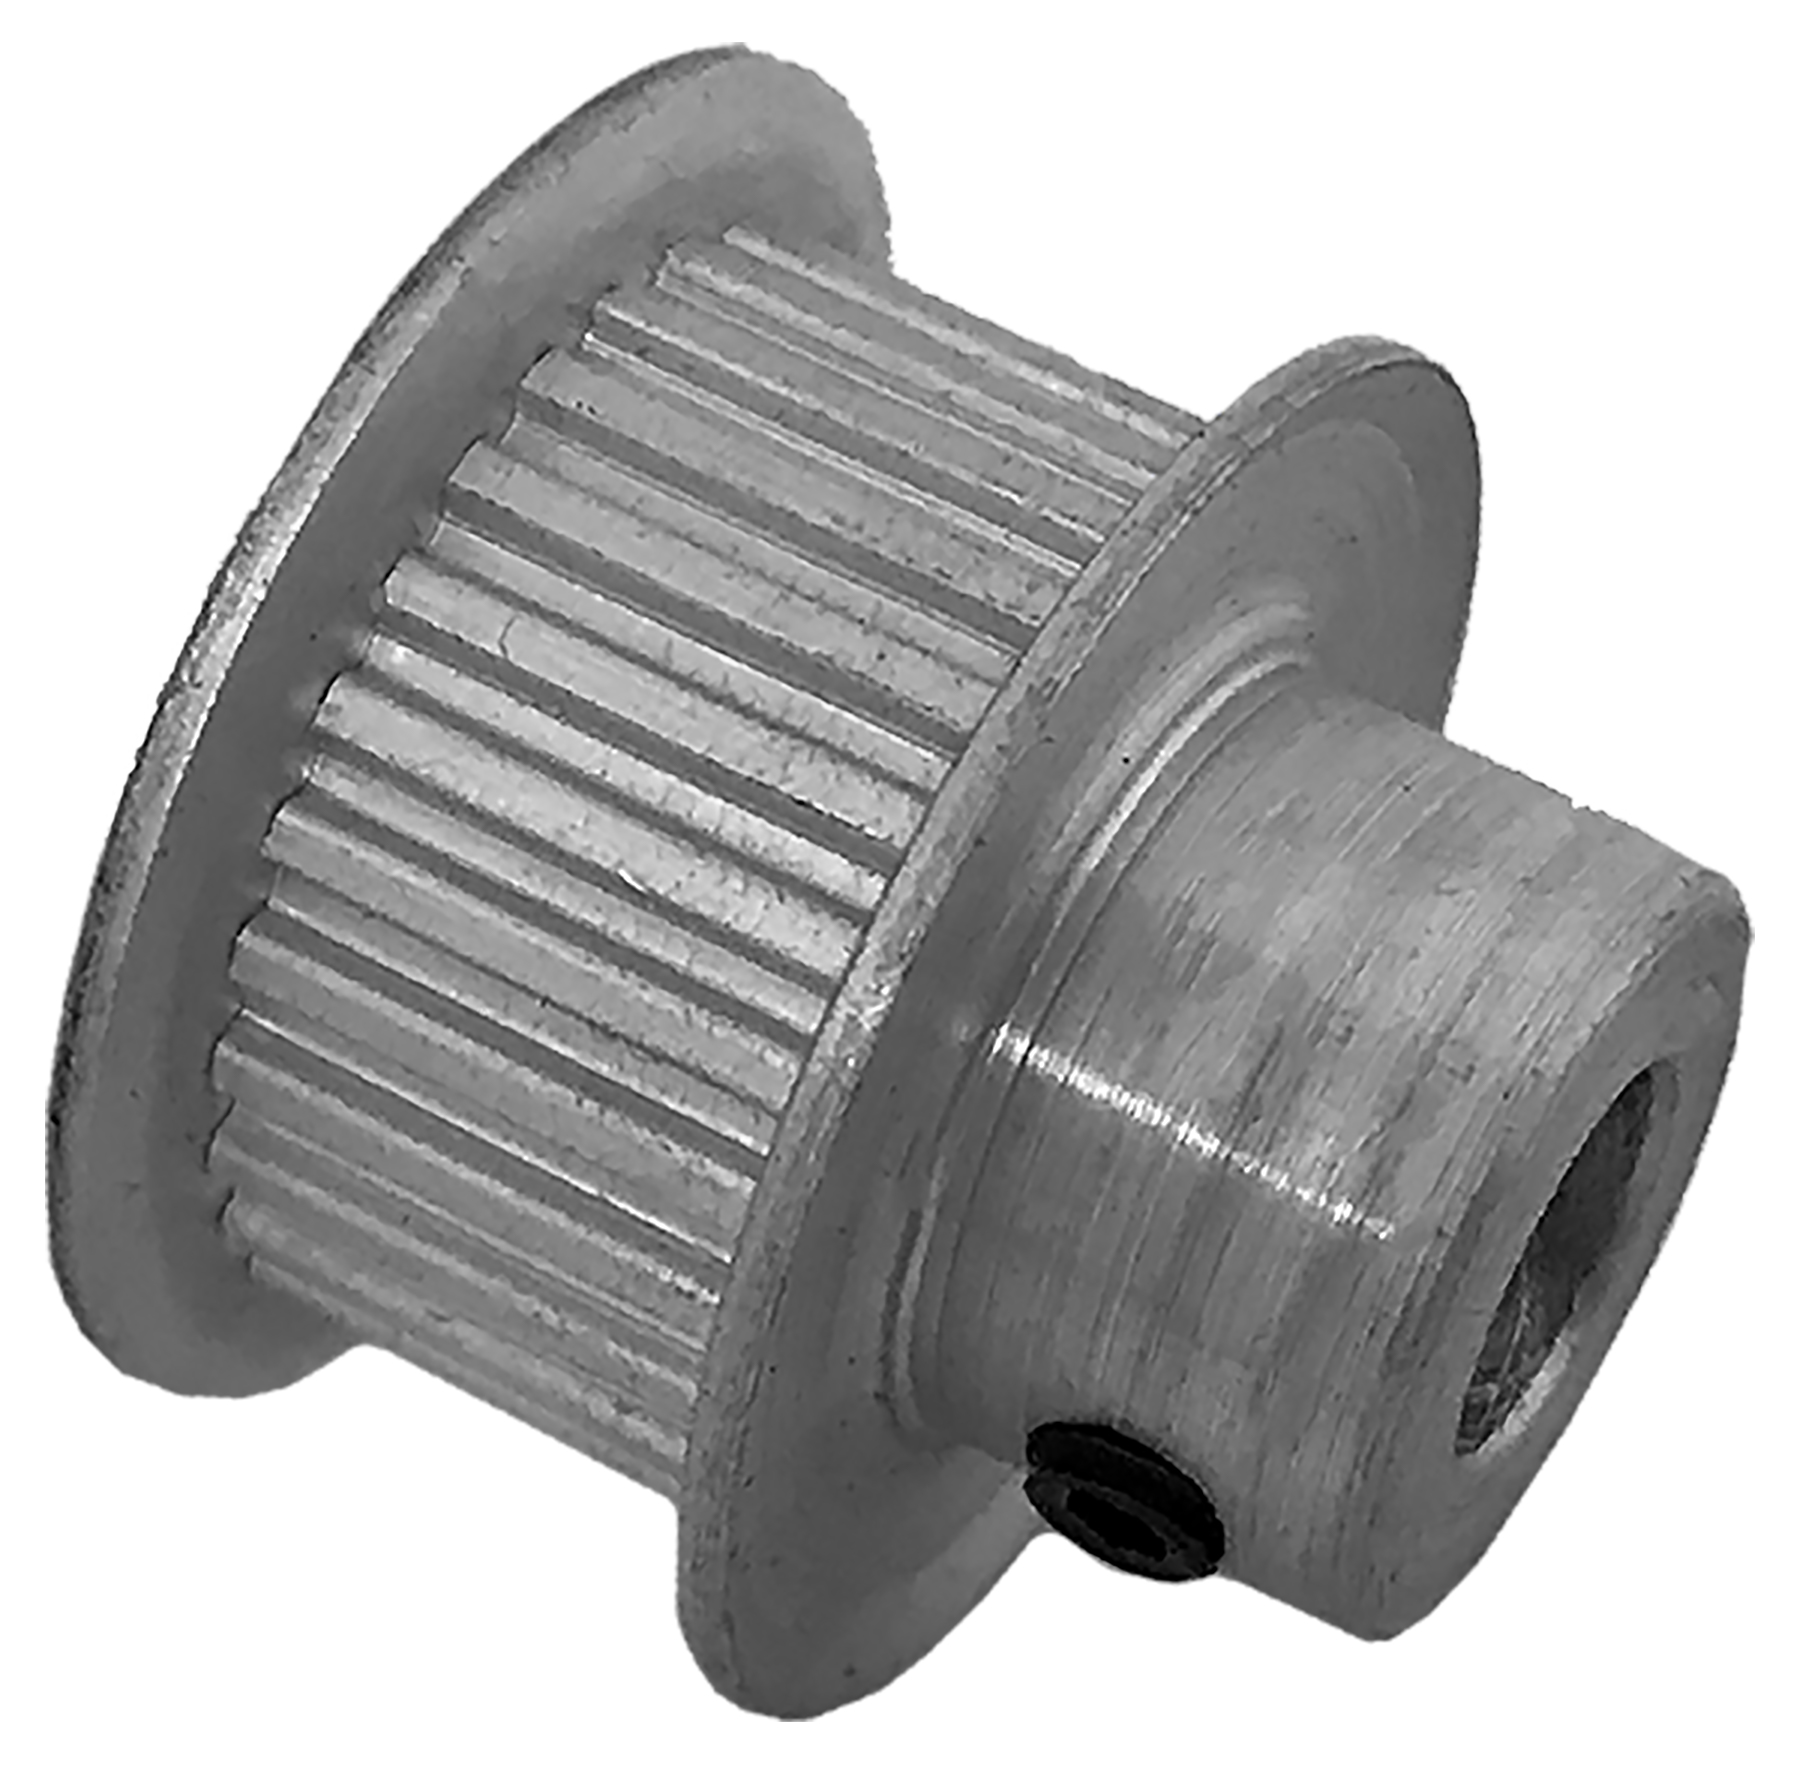 28LT312-6FA3 - Aluminum Imperial Pitch Pulleys